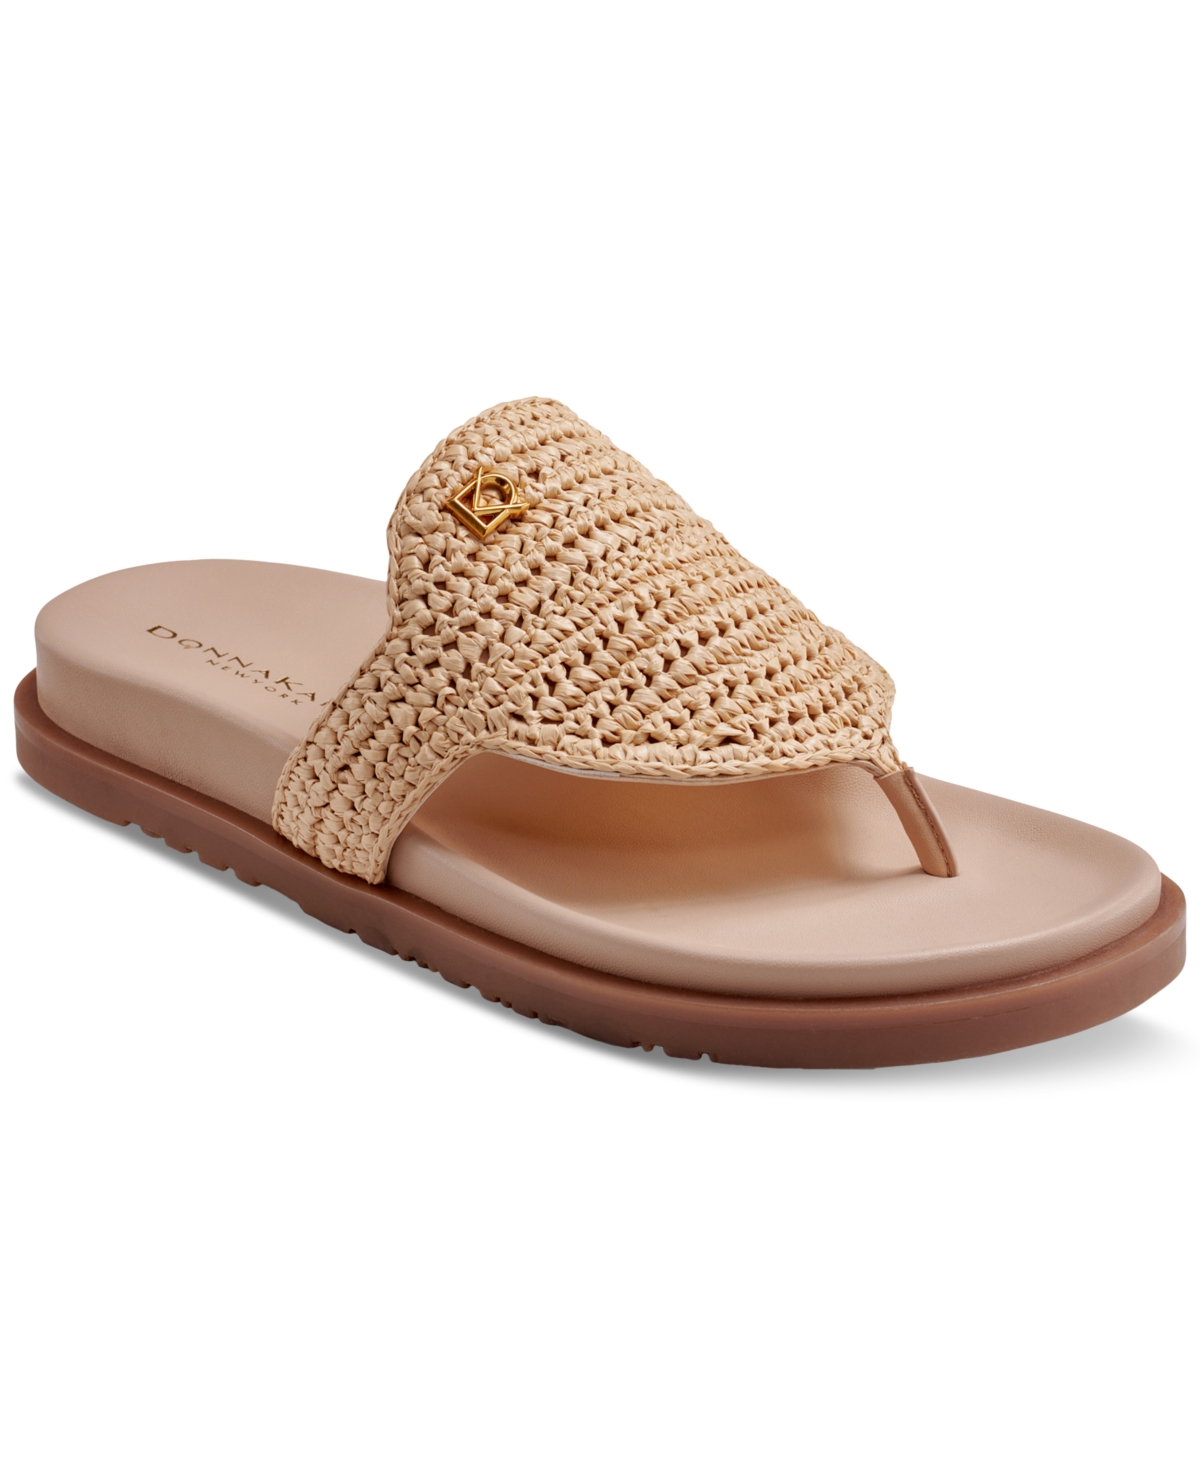 Hira Slip-On Woven Thong Sandals - Natural/ Nude